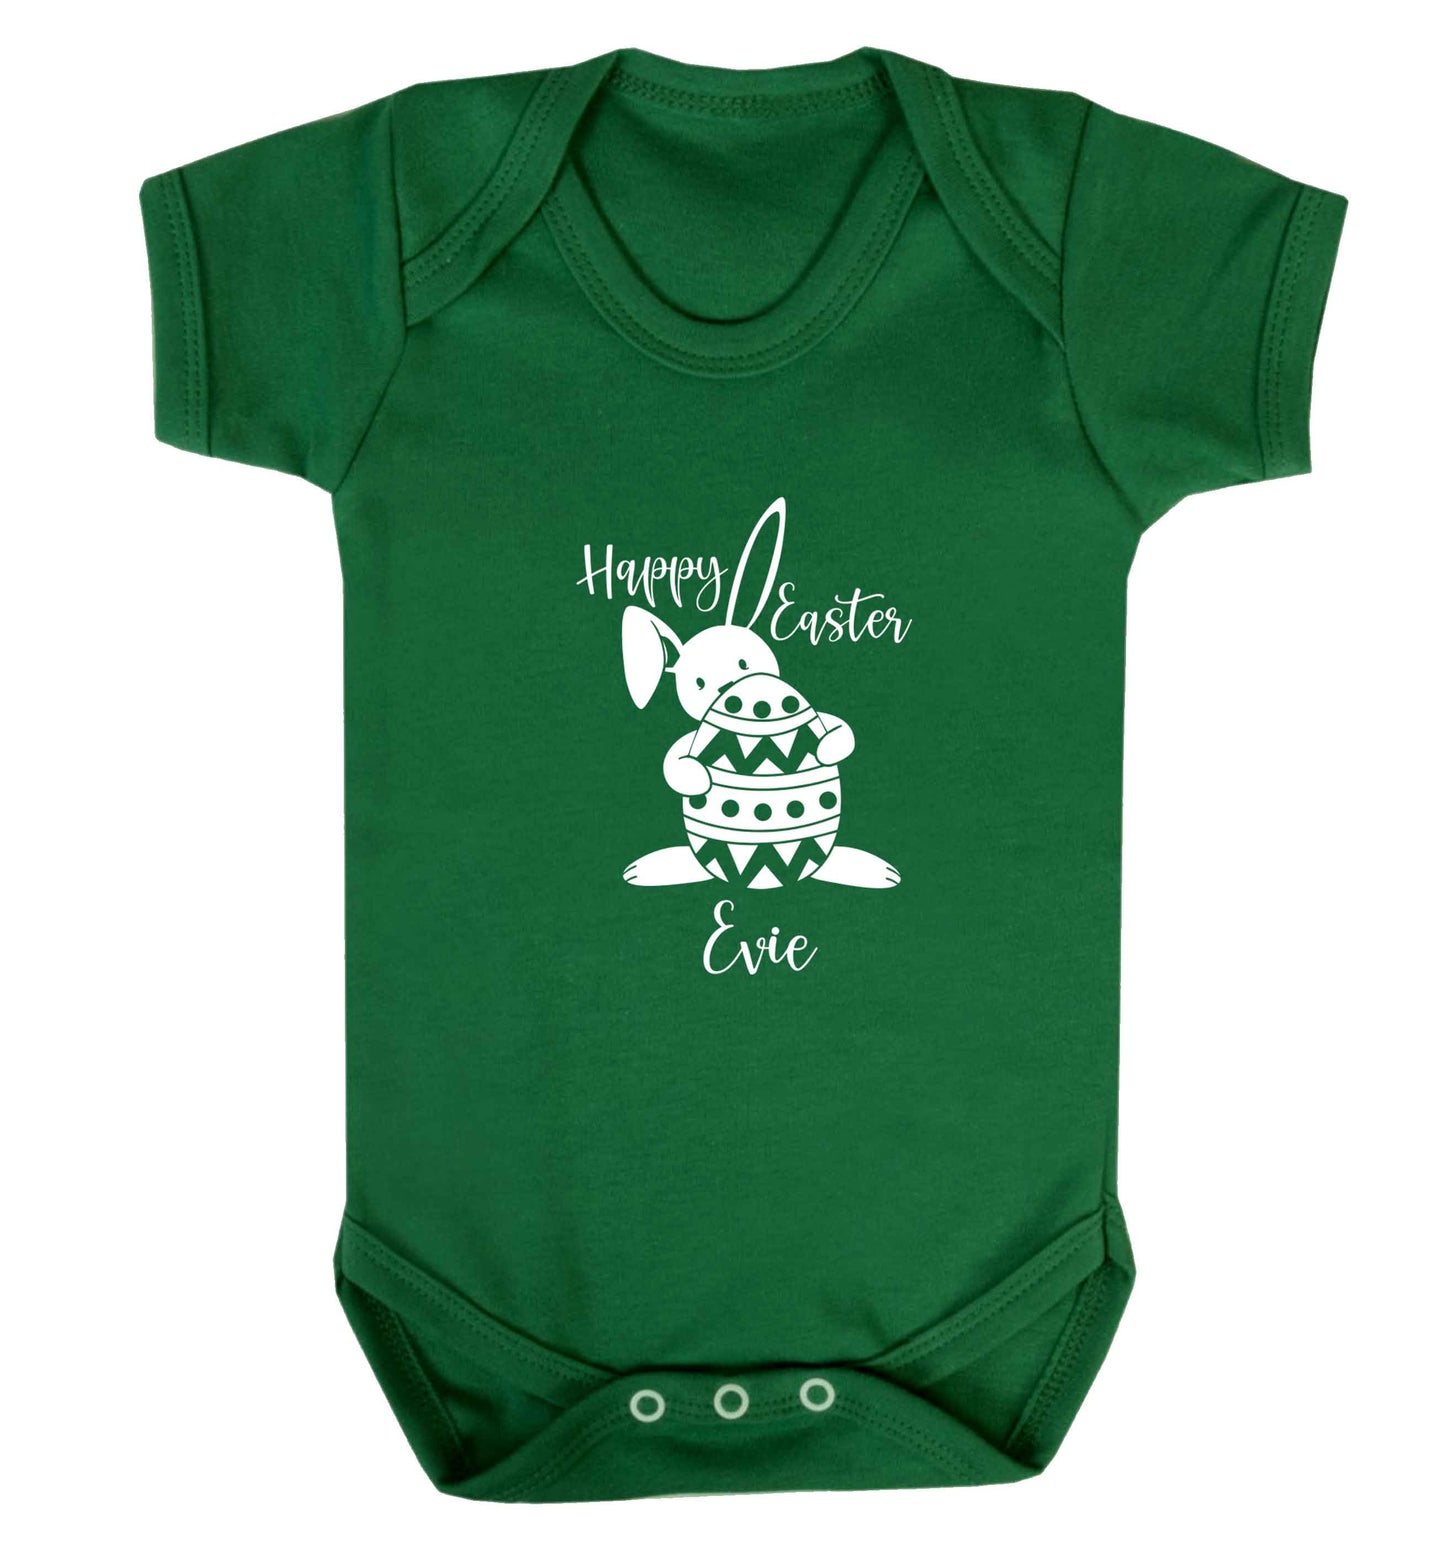 Happy Easter - personalised baby vest green 18-24 months